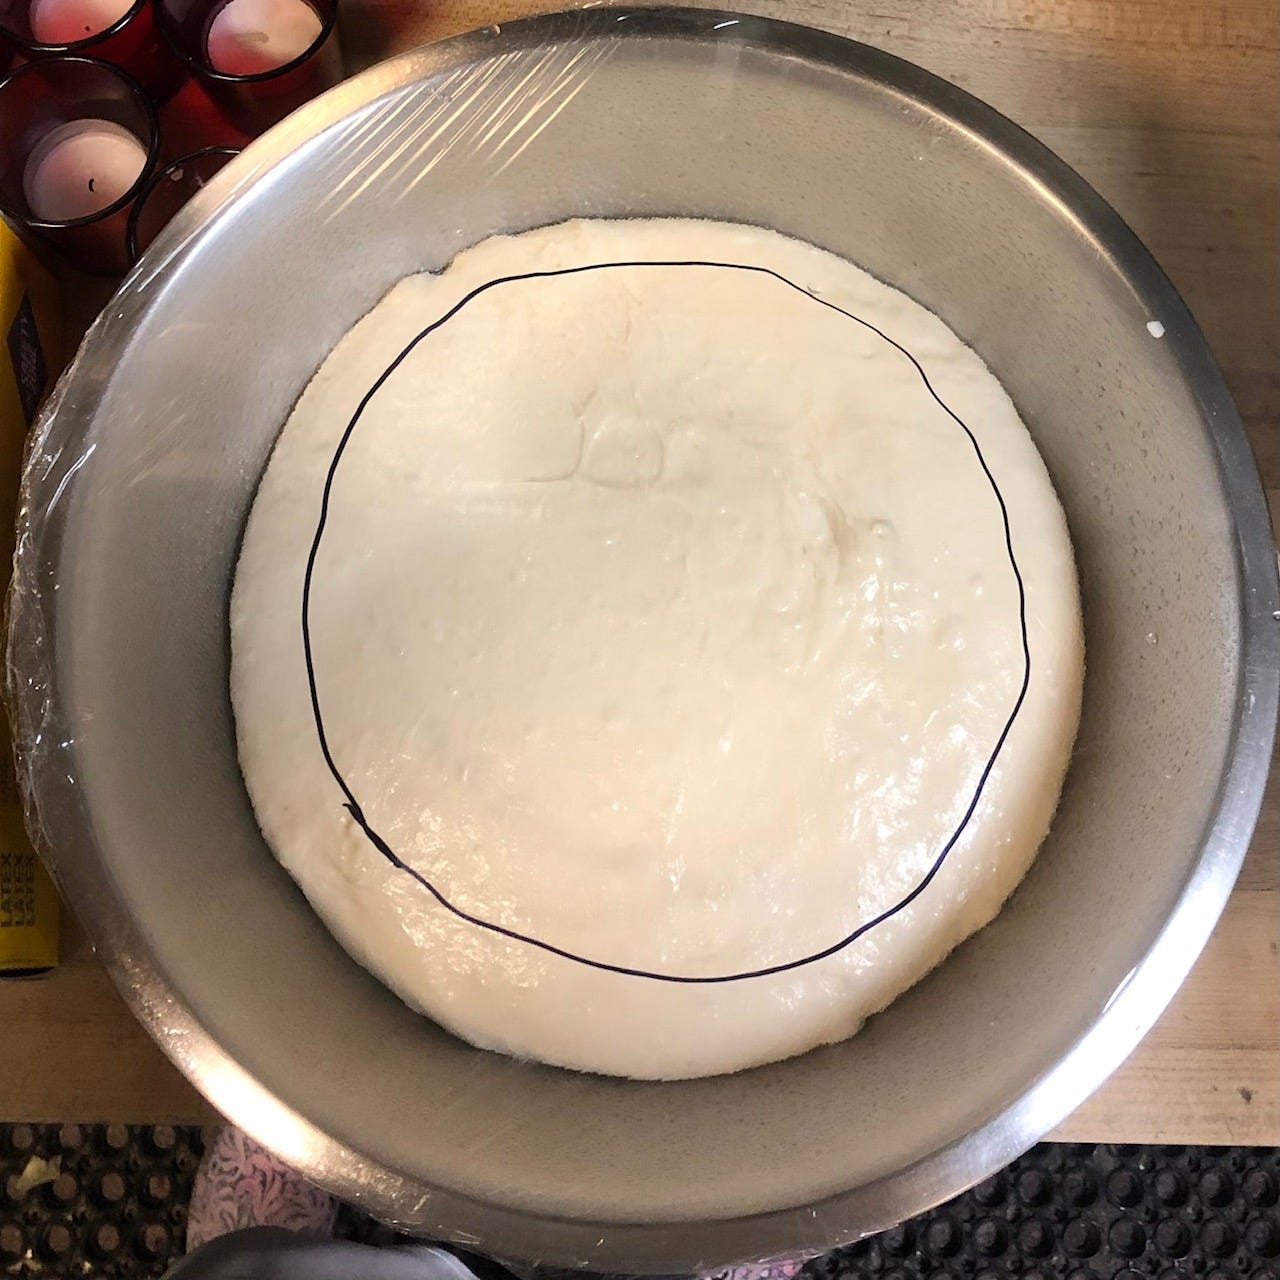 A round of raw dough in a metal bowl, covered with plastic wrap. A black circle drawn on the plastic sits just inside the dough.